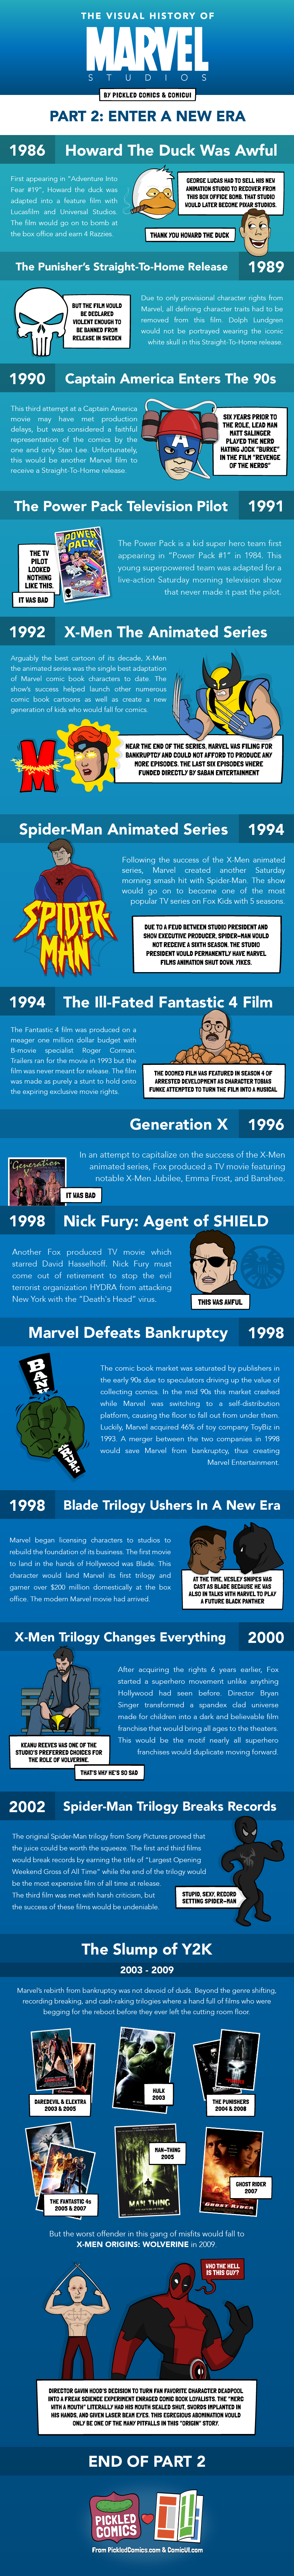 The Visual History Of Marvel Studios. Part 2 starts in 1986 with Howard the Duck and ends in 2009 with 6 years of Marvel movie duds.